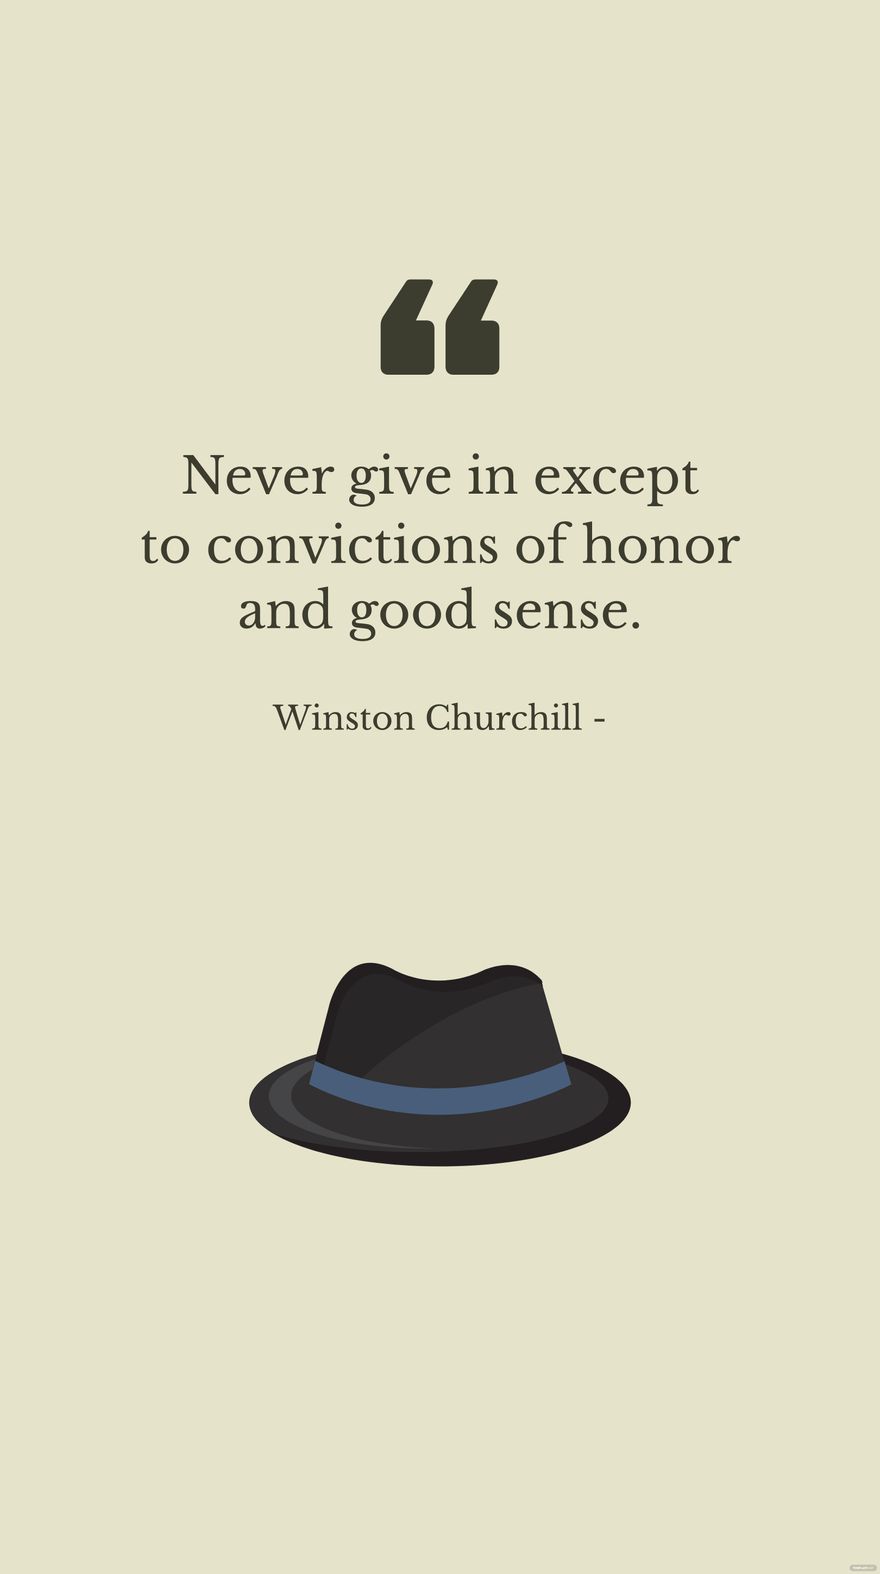 Winston Churchill - Never give in except to convictions of honor and good sense.